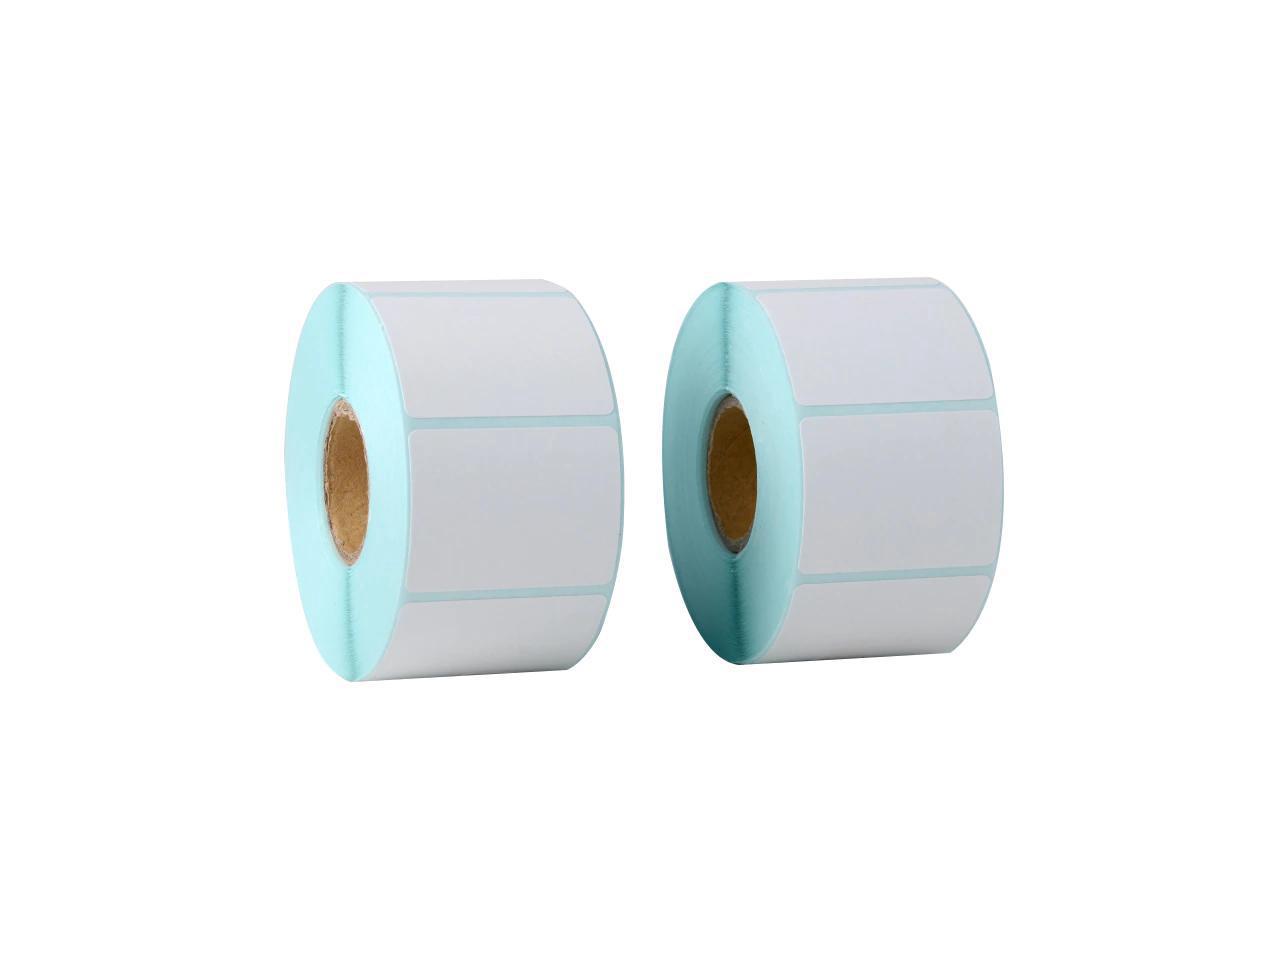 Details about   24Size Barcode Label Adhesive Thermal Label StickerPaper Supermarket Price Blank 